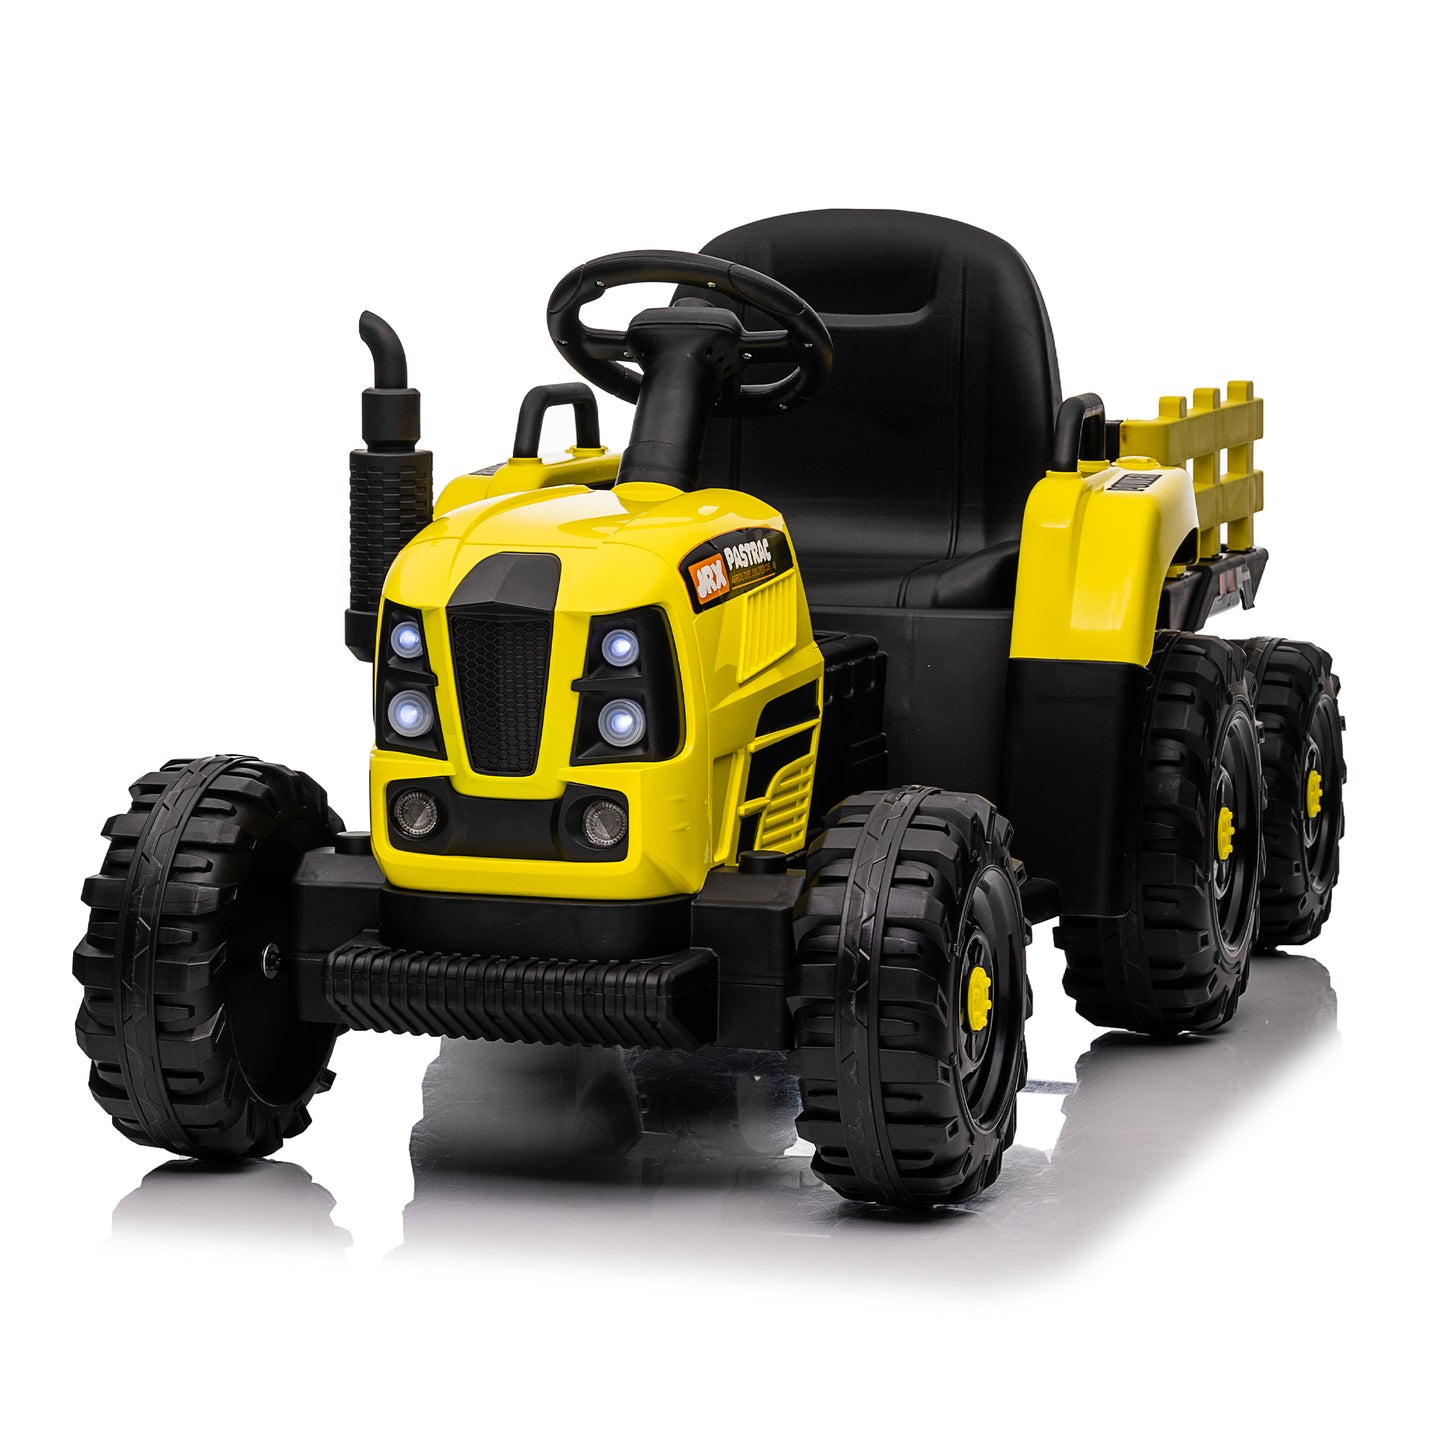 Electric Farm Tractor Ride-On Toy with Remote Control and Realistic Features for Kids, 12V Battery Powered with Music, Lights, and Safety Belt